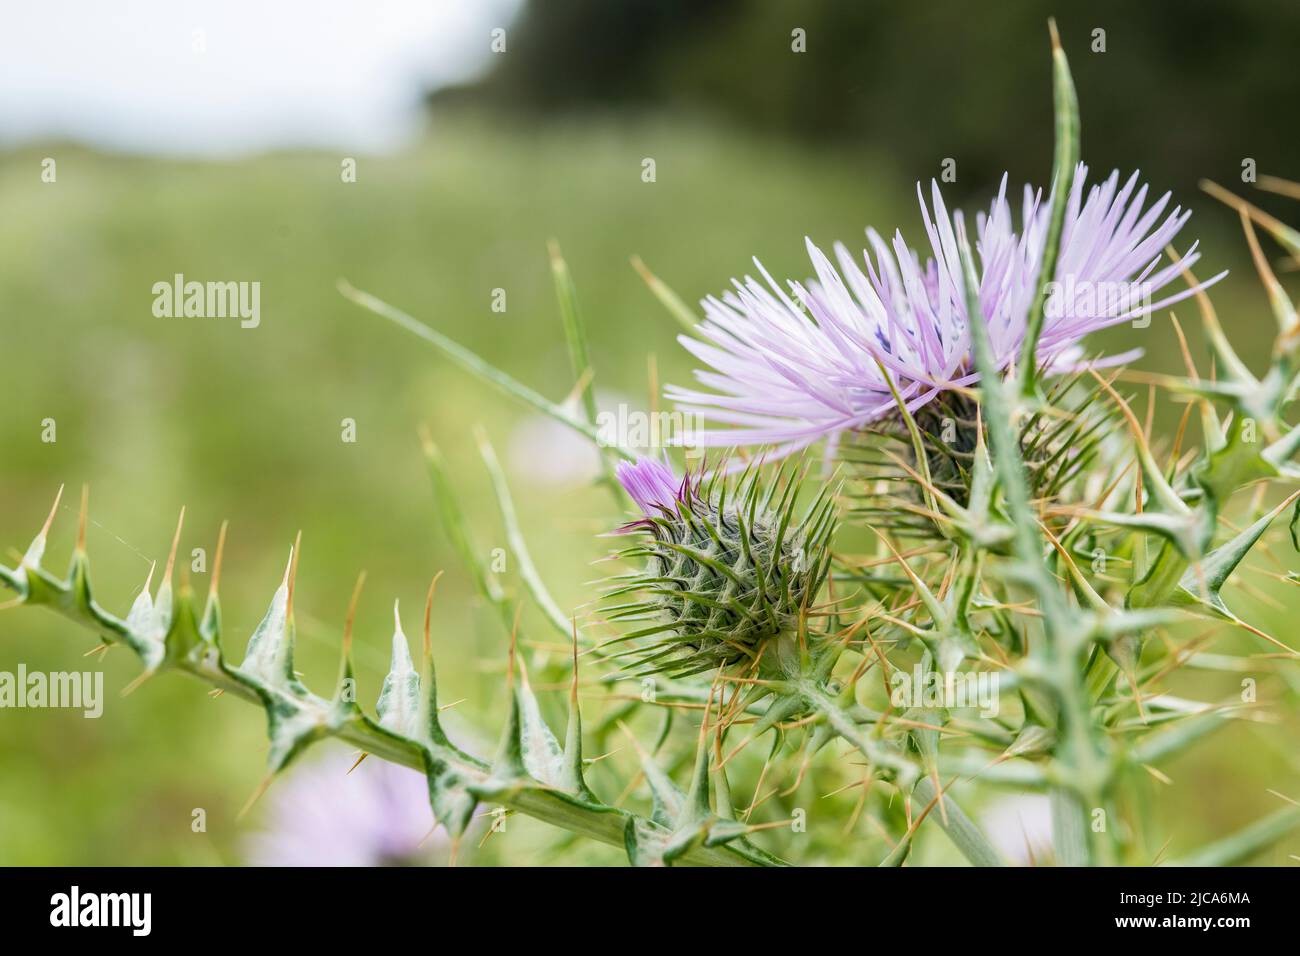 Galactites tomentosus, the purple milk thistle, is a biennial herbaceous plant belonging to the genus Galactites of the Asteraceae family. Stock Photo